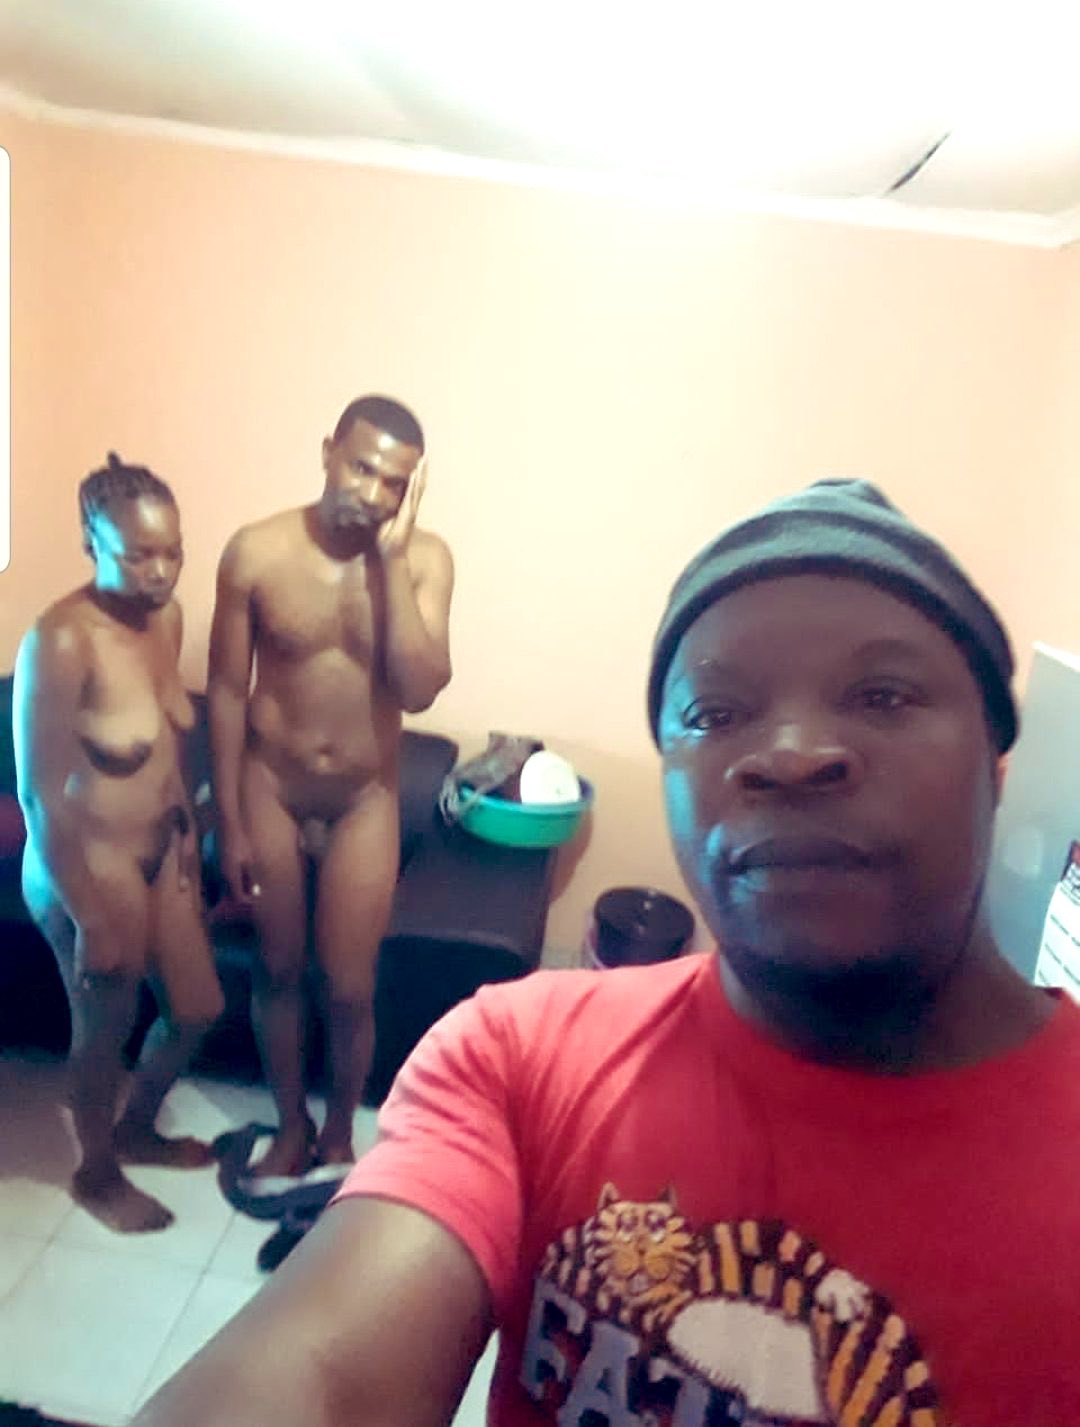 man caught wife and his friend having sex, Took Selfie